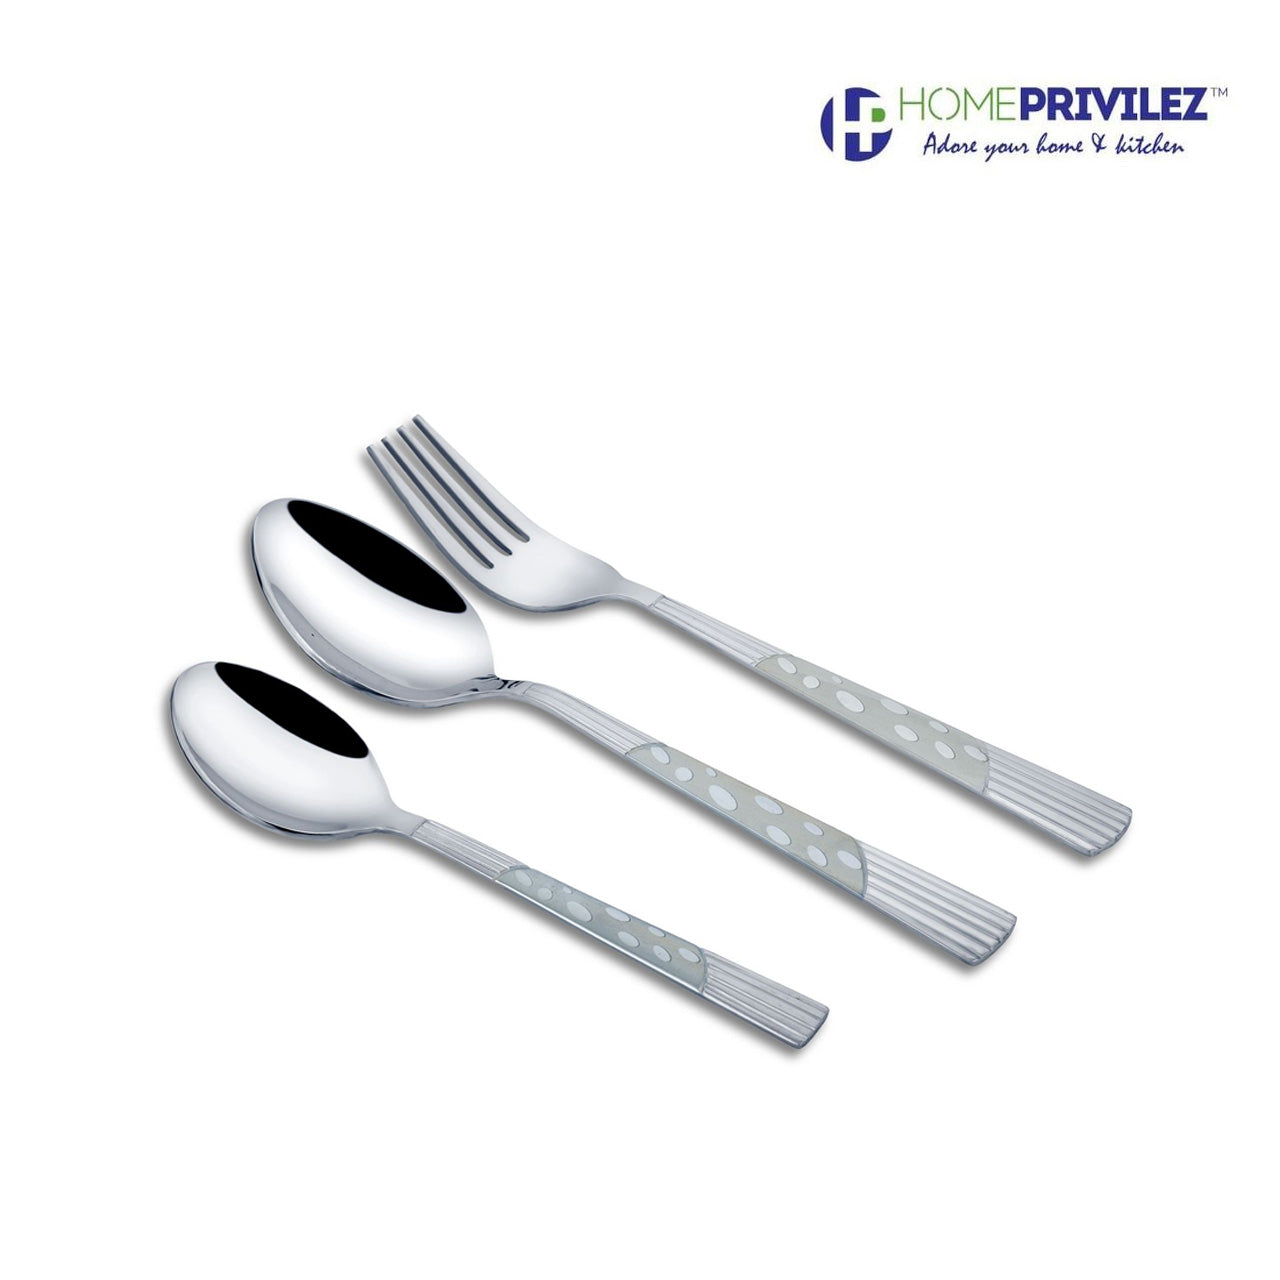 Combo 3(Stainless Steel Serving Tool 3pcs & Bella cutlery 18pcs)-Set of 21pcs